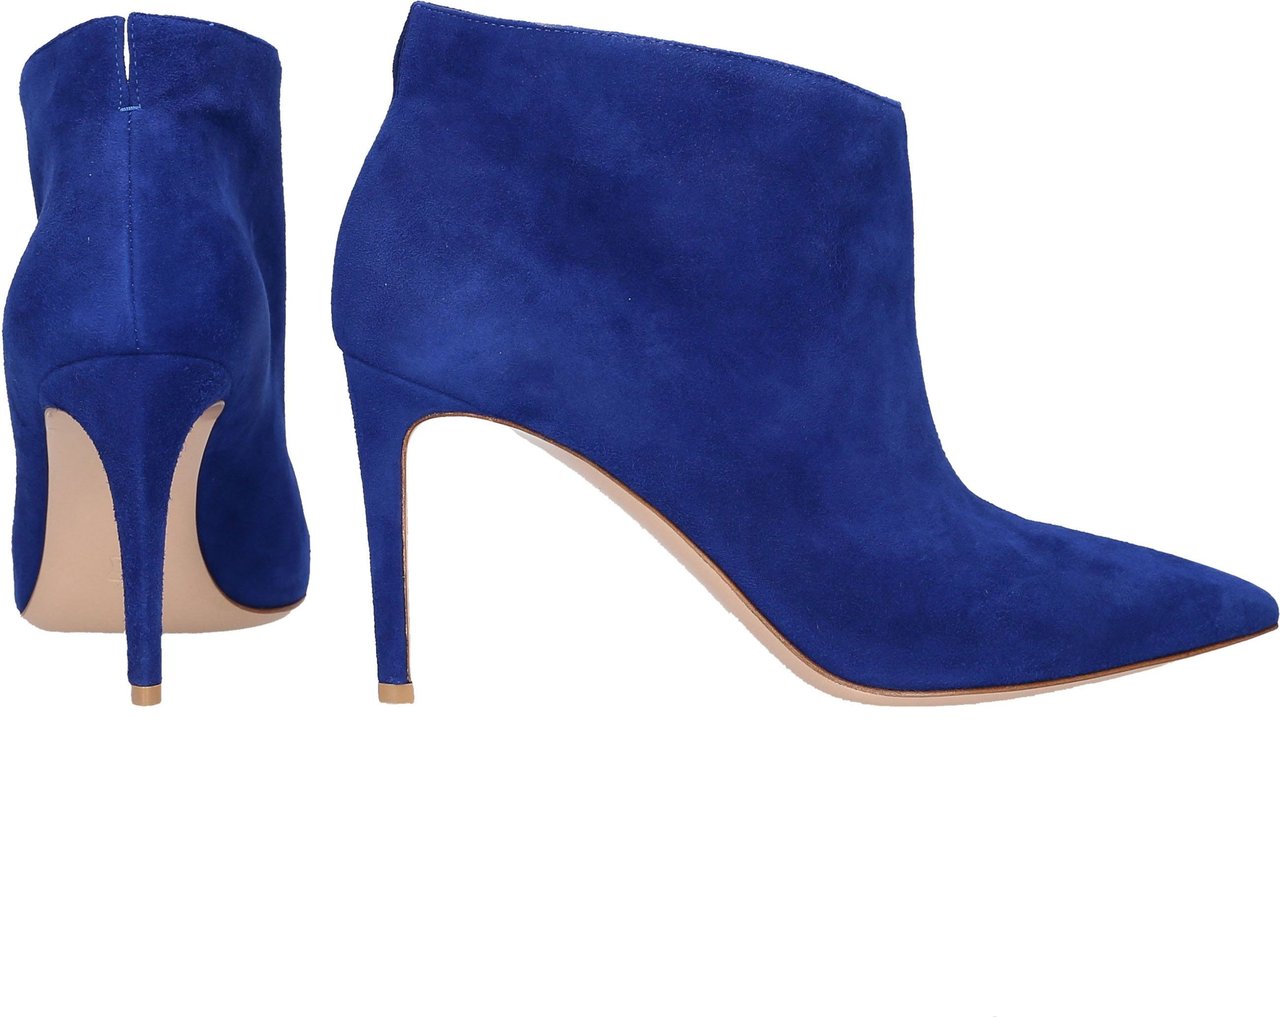 Gianvito Rossi Women Classic Ankle Boots G Suede - Gilmore W Blauw